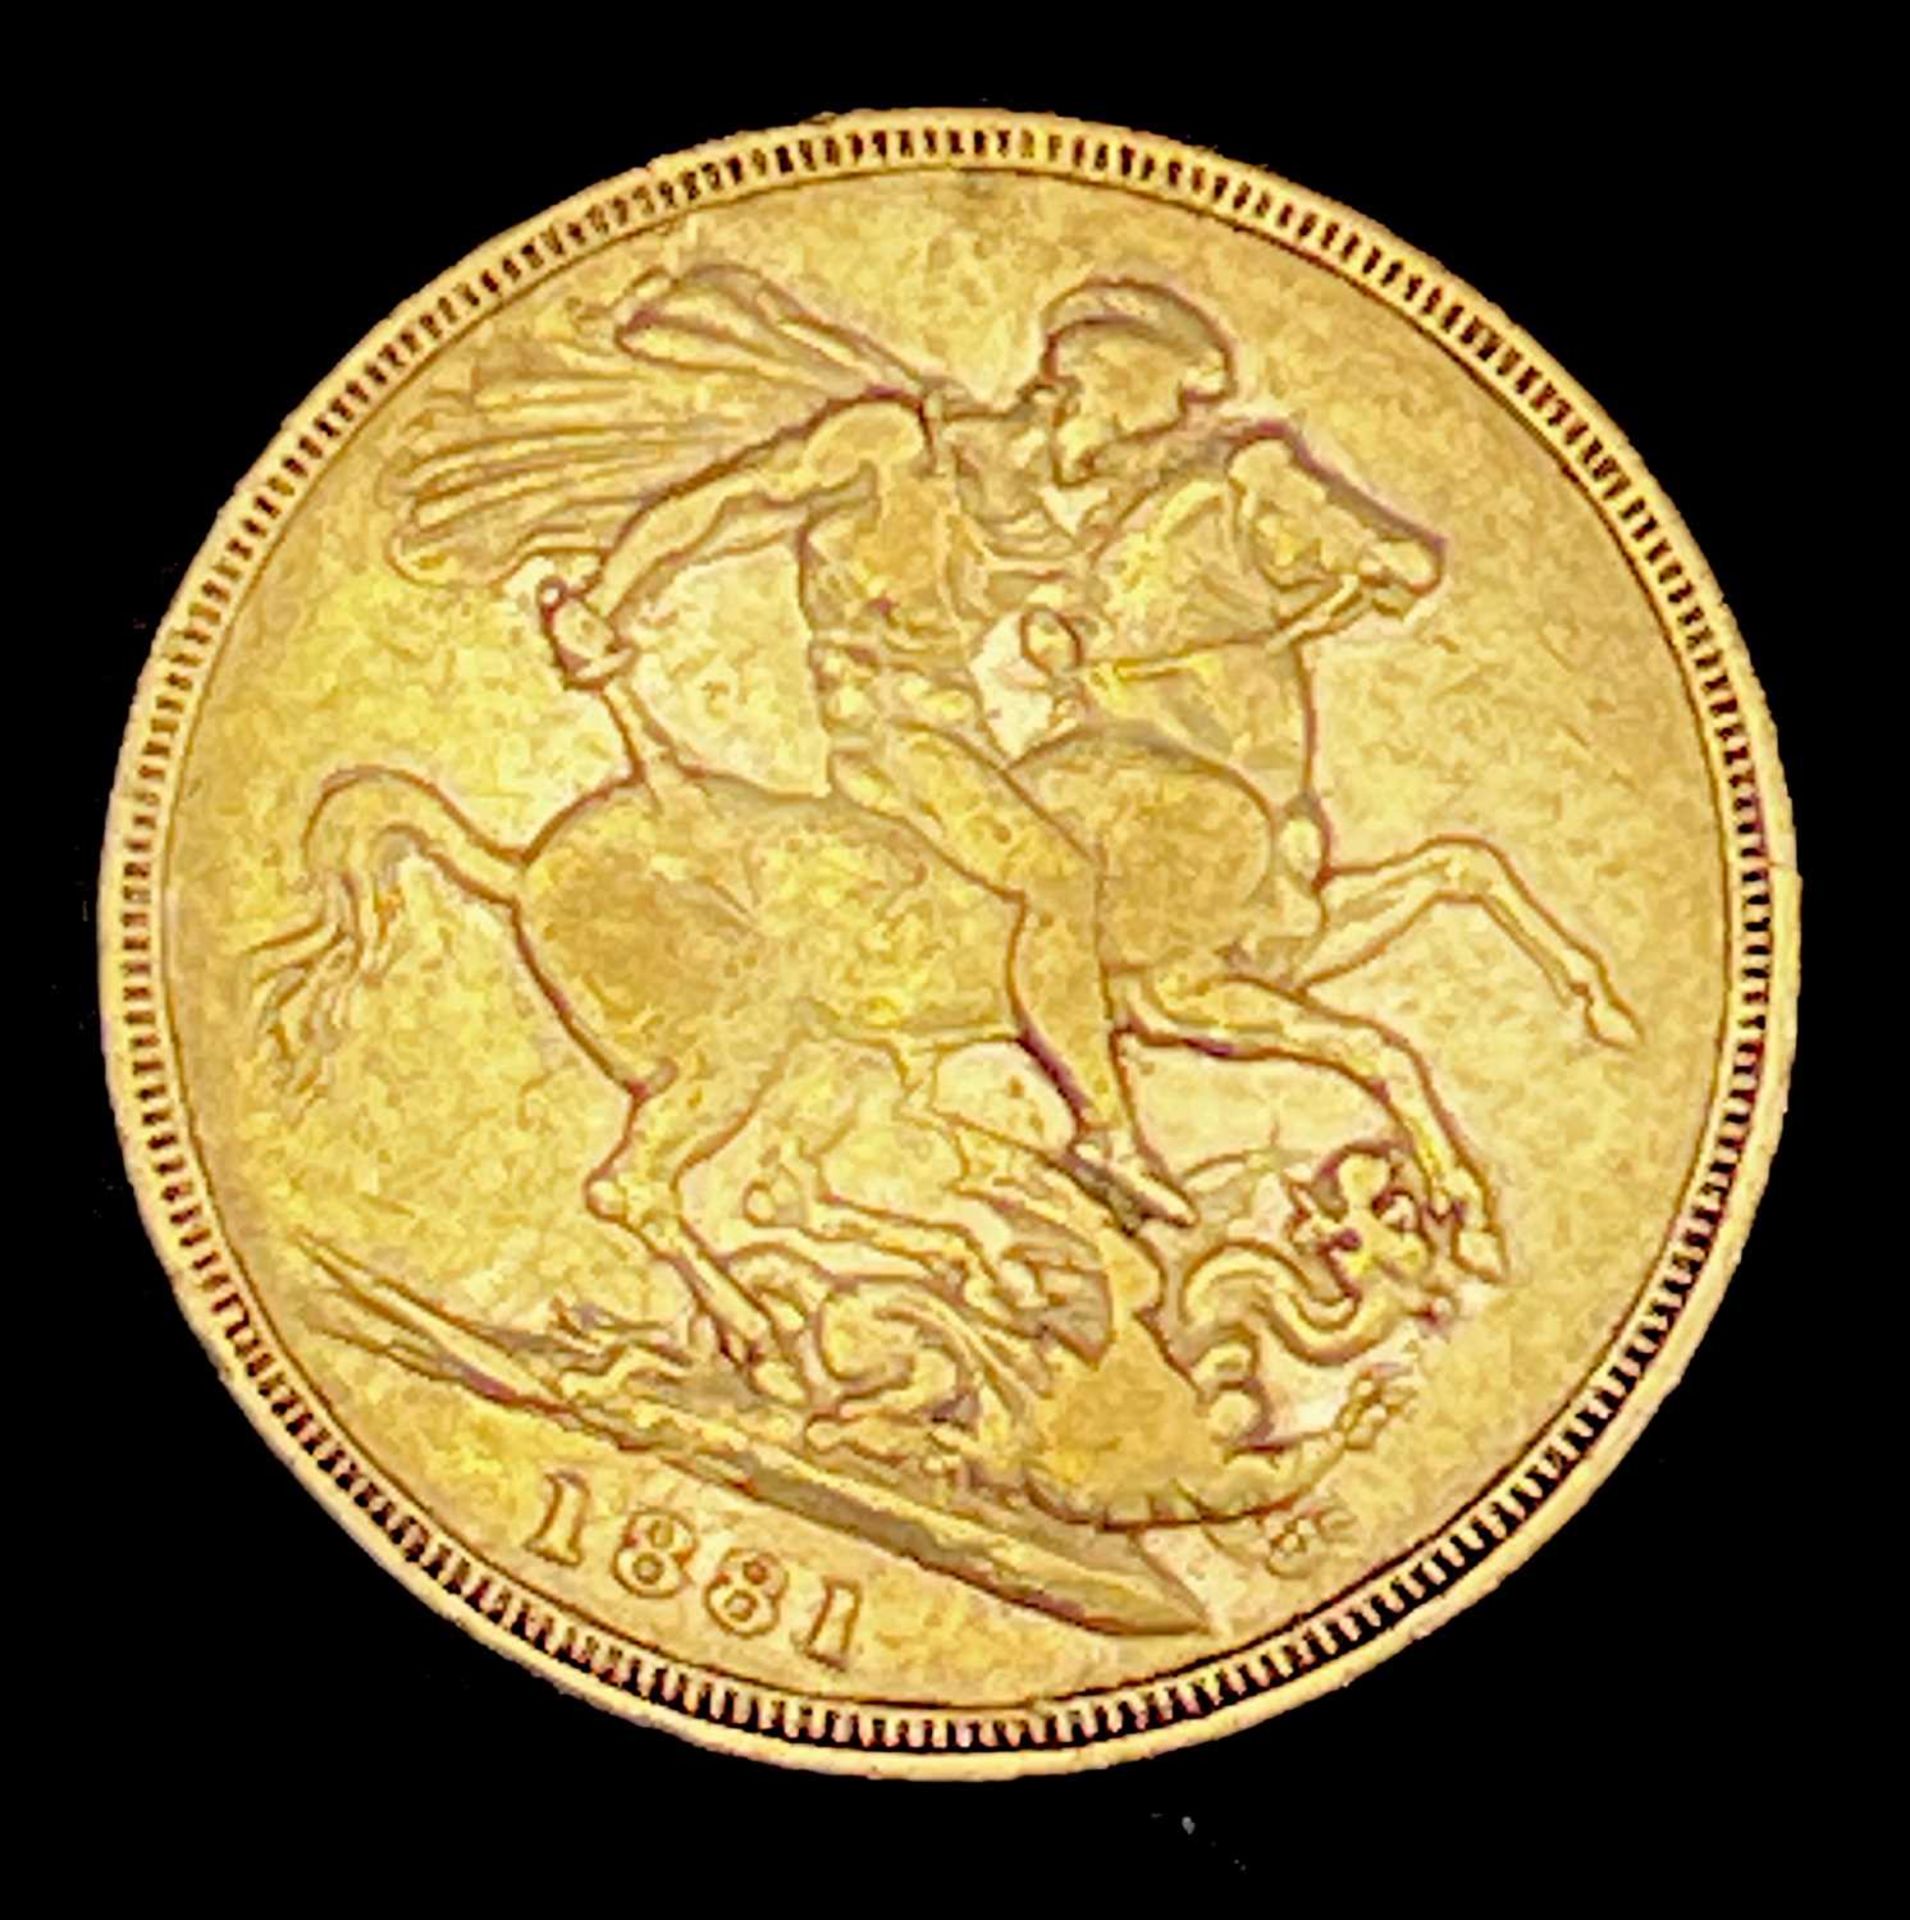 Great Britain Gold Sovereign 1881 George & Dragon Additional Information: Melbourne mint mark is